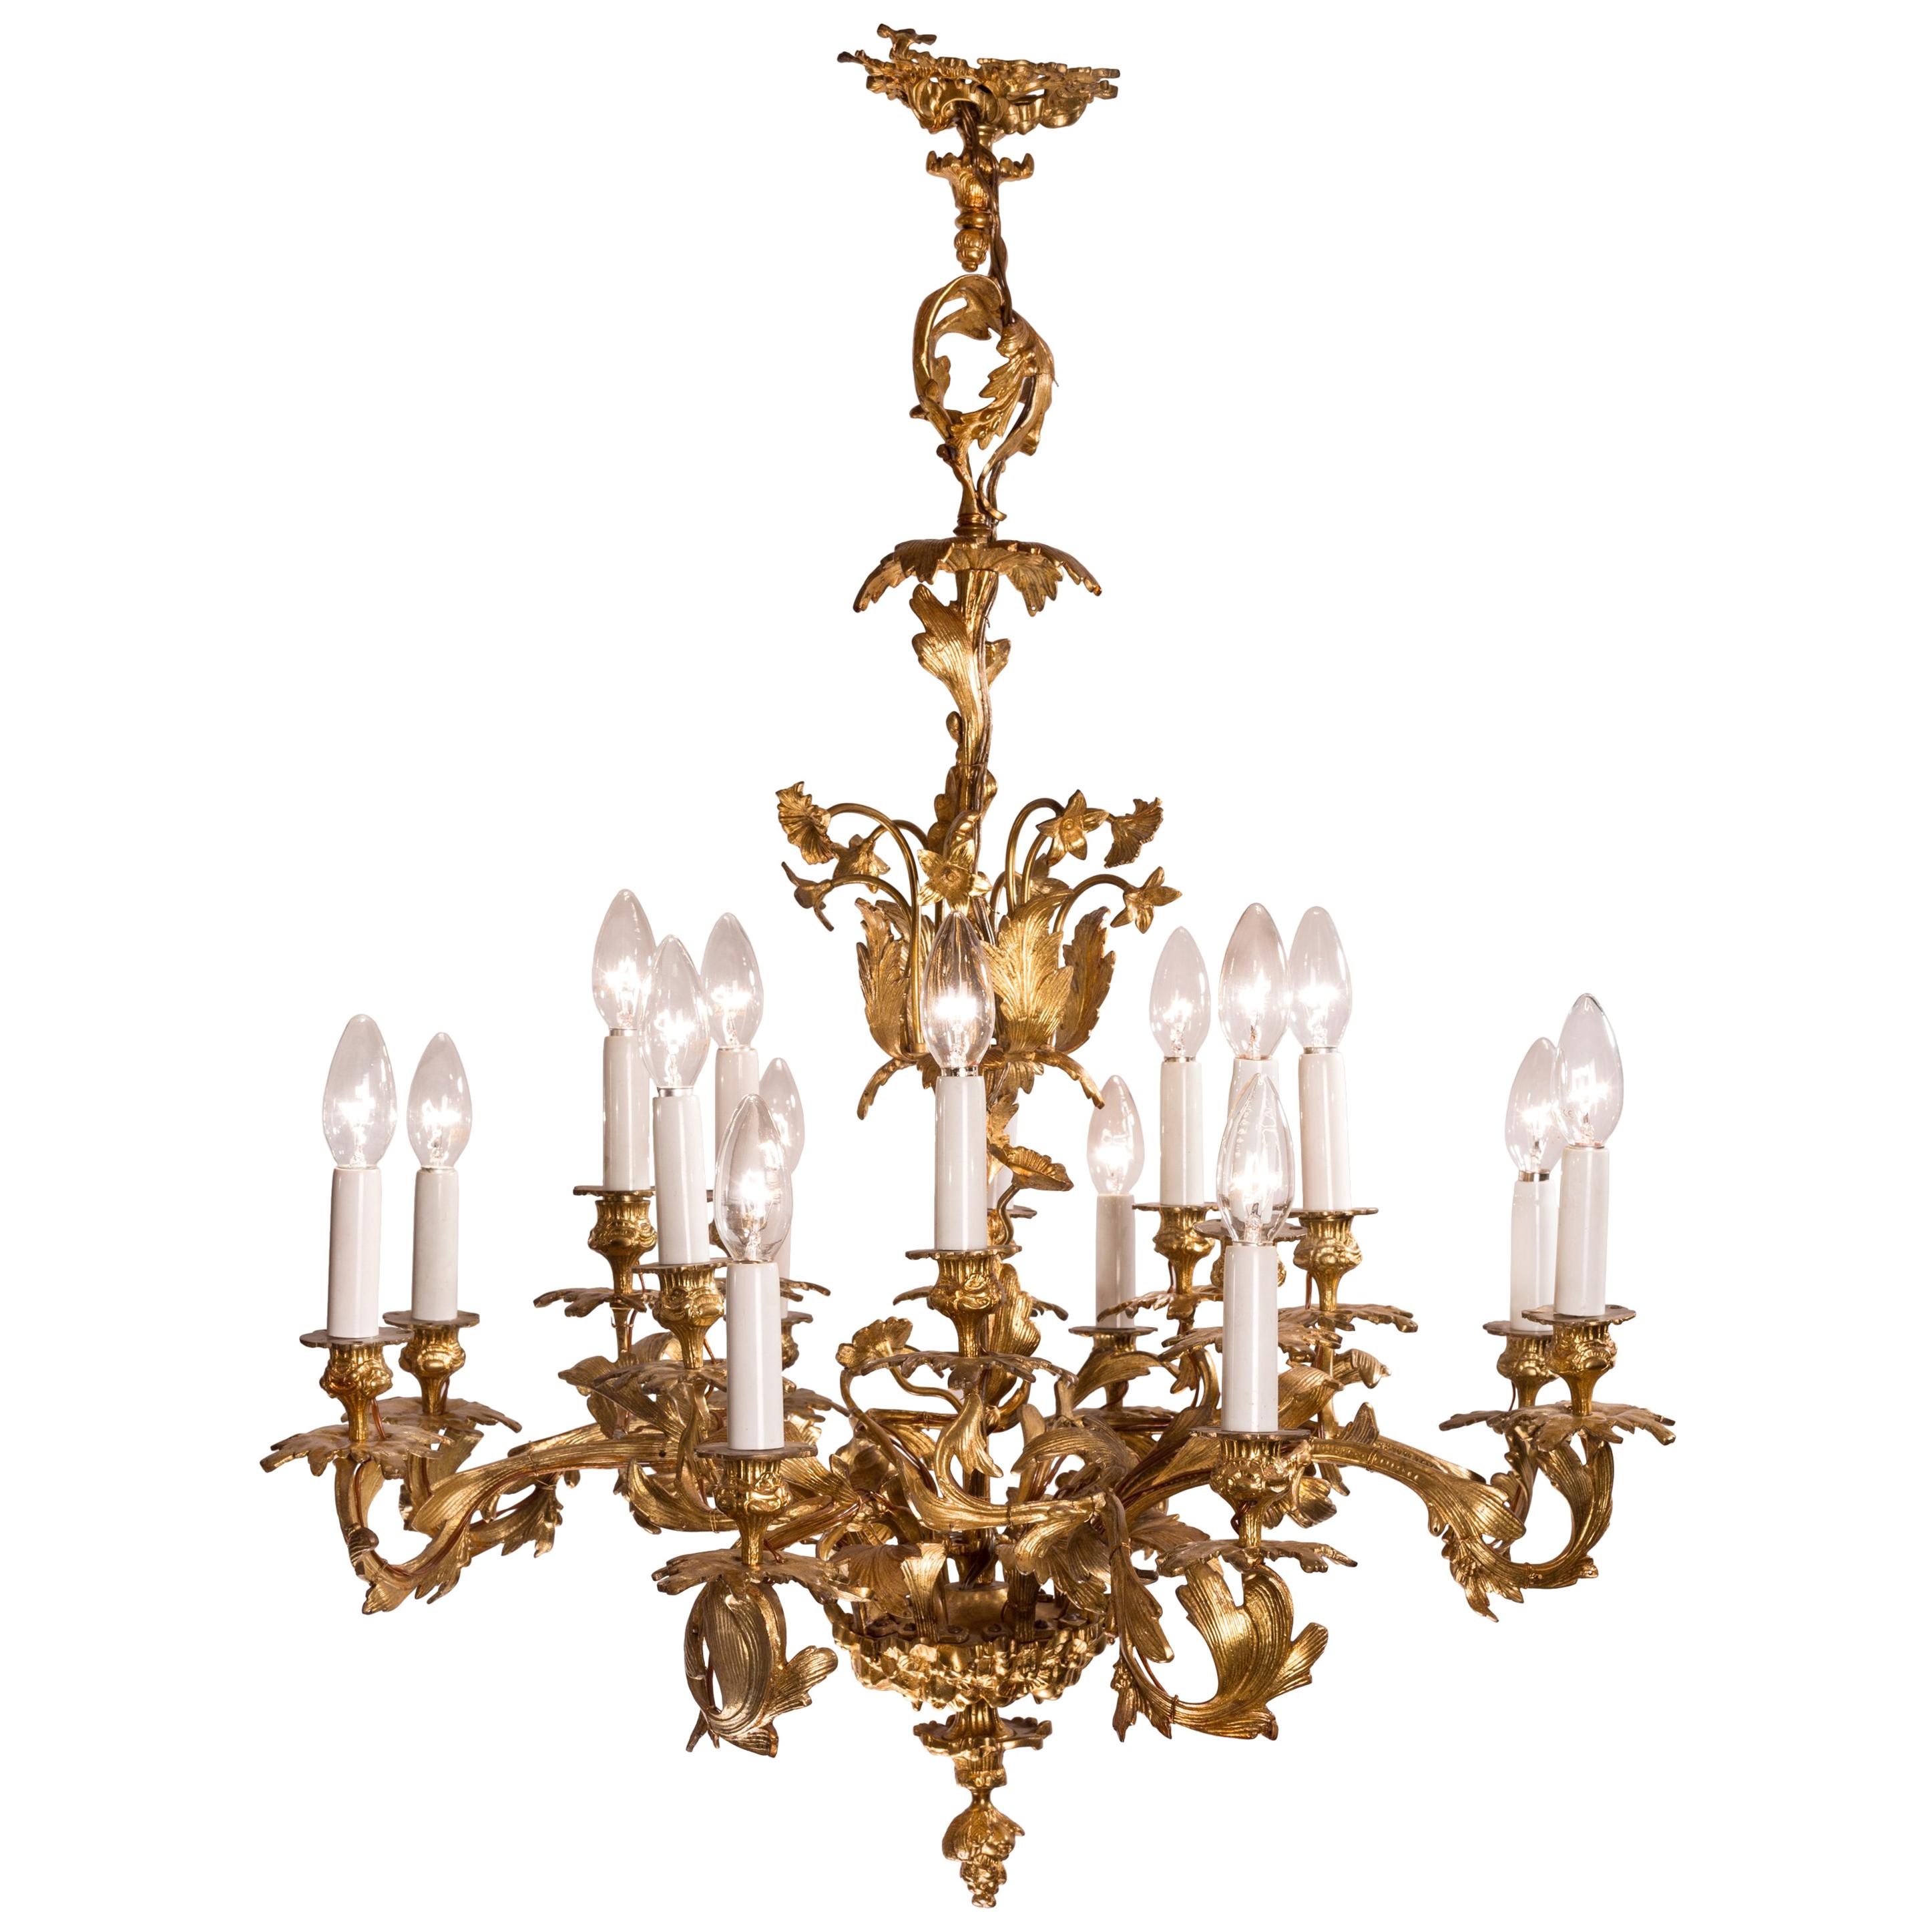 Louis XV Rococo Style 16-Light Bronze Chandelier with Leaf and Flower Motifs For Sale